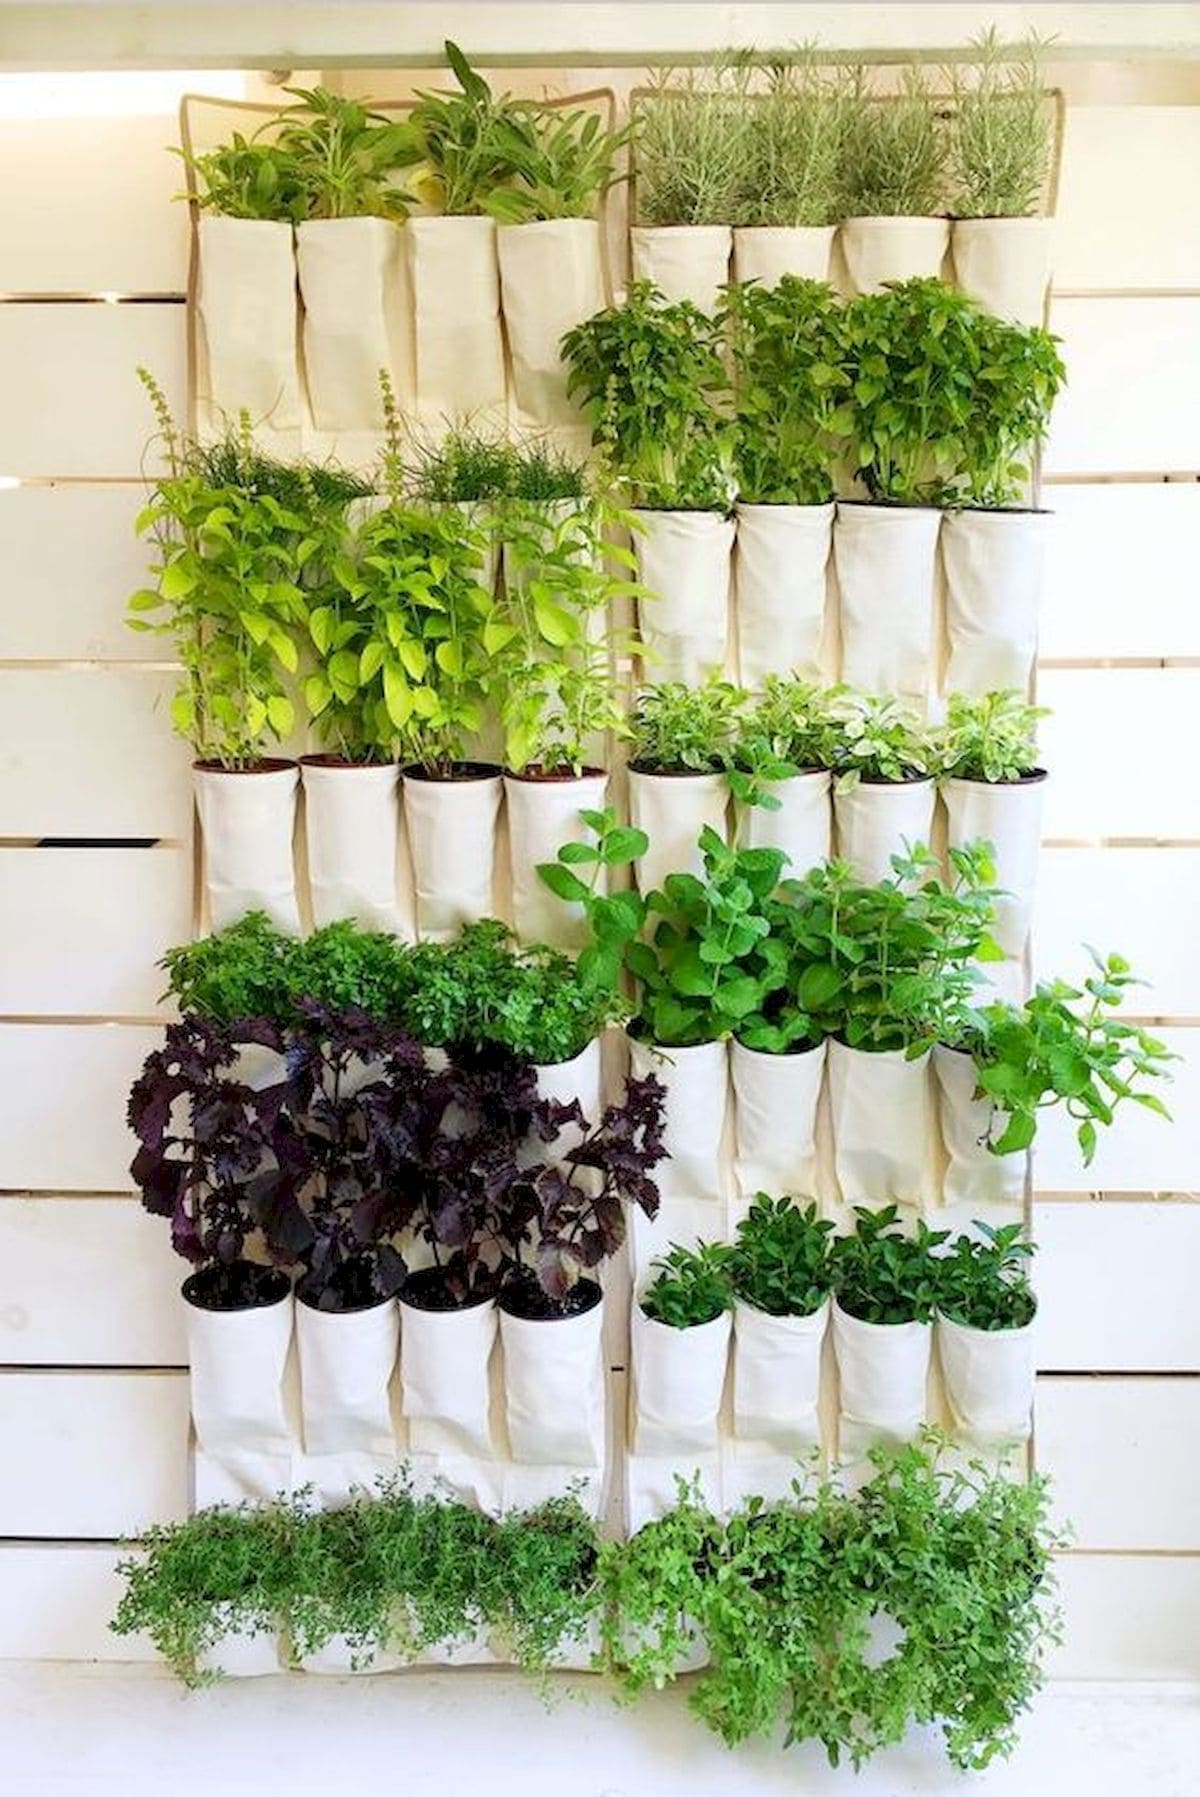 26 creative ideas to make your home greener - 85